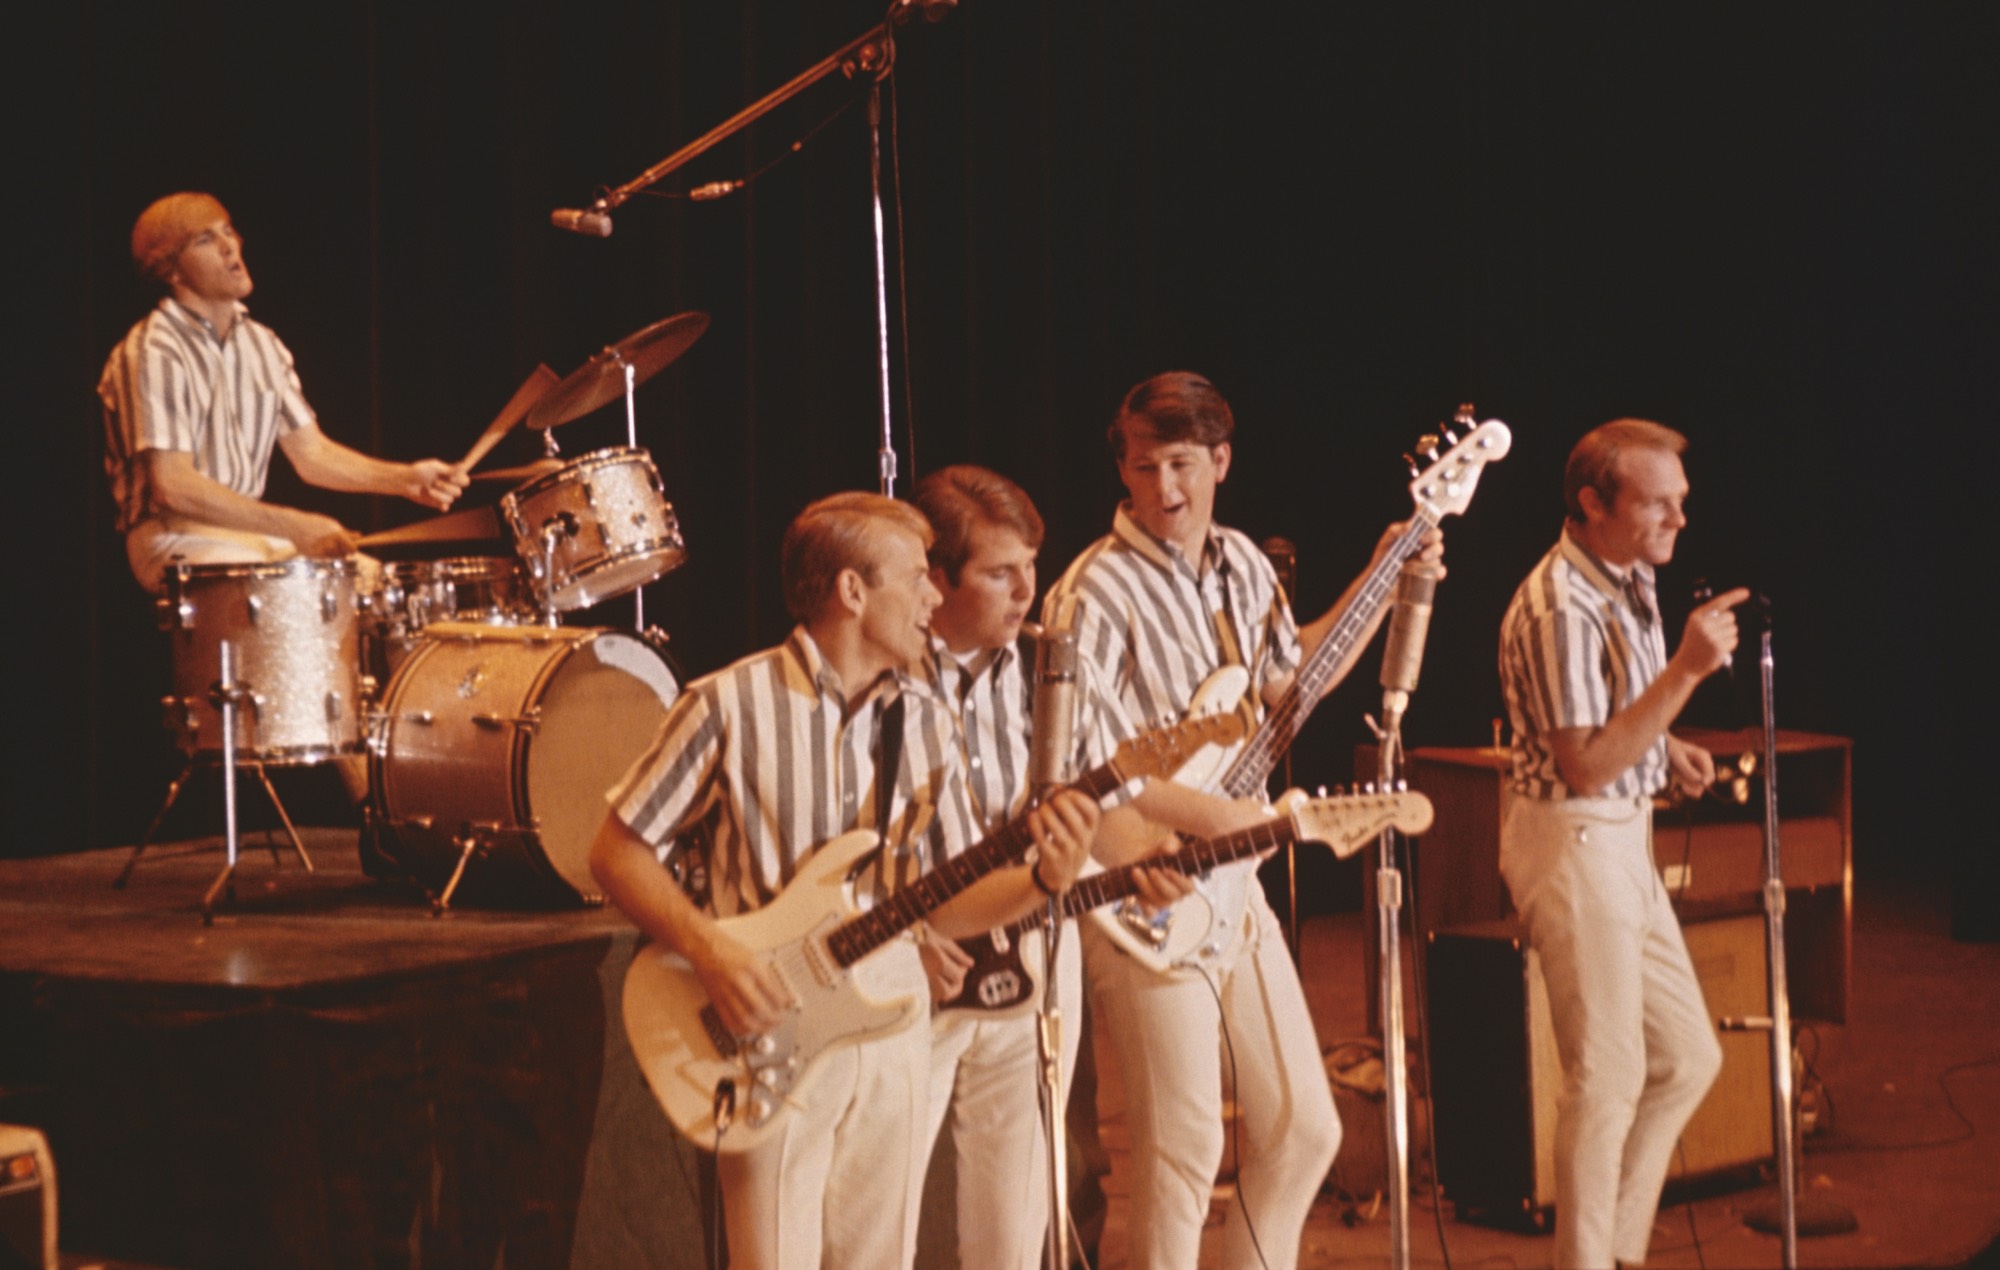 There’s a new Beach Boys documentary coming to Disney+